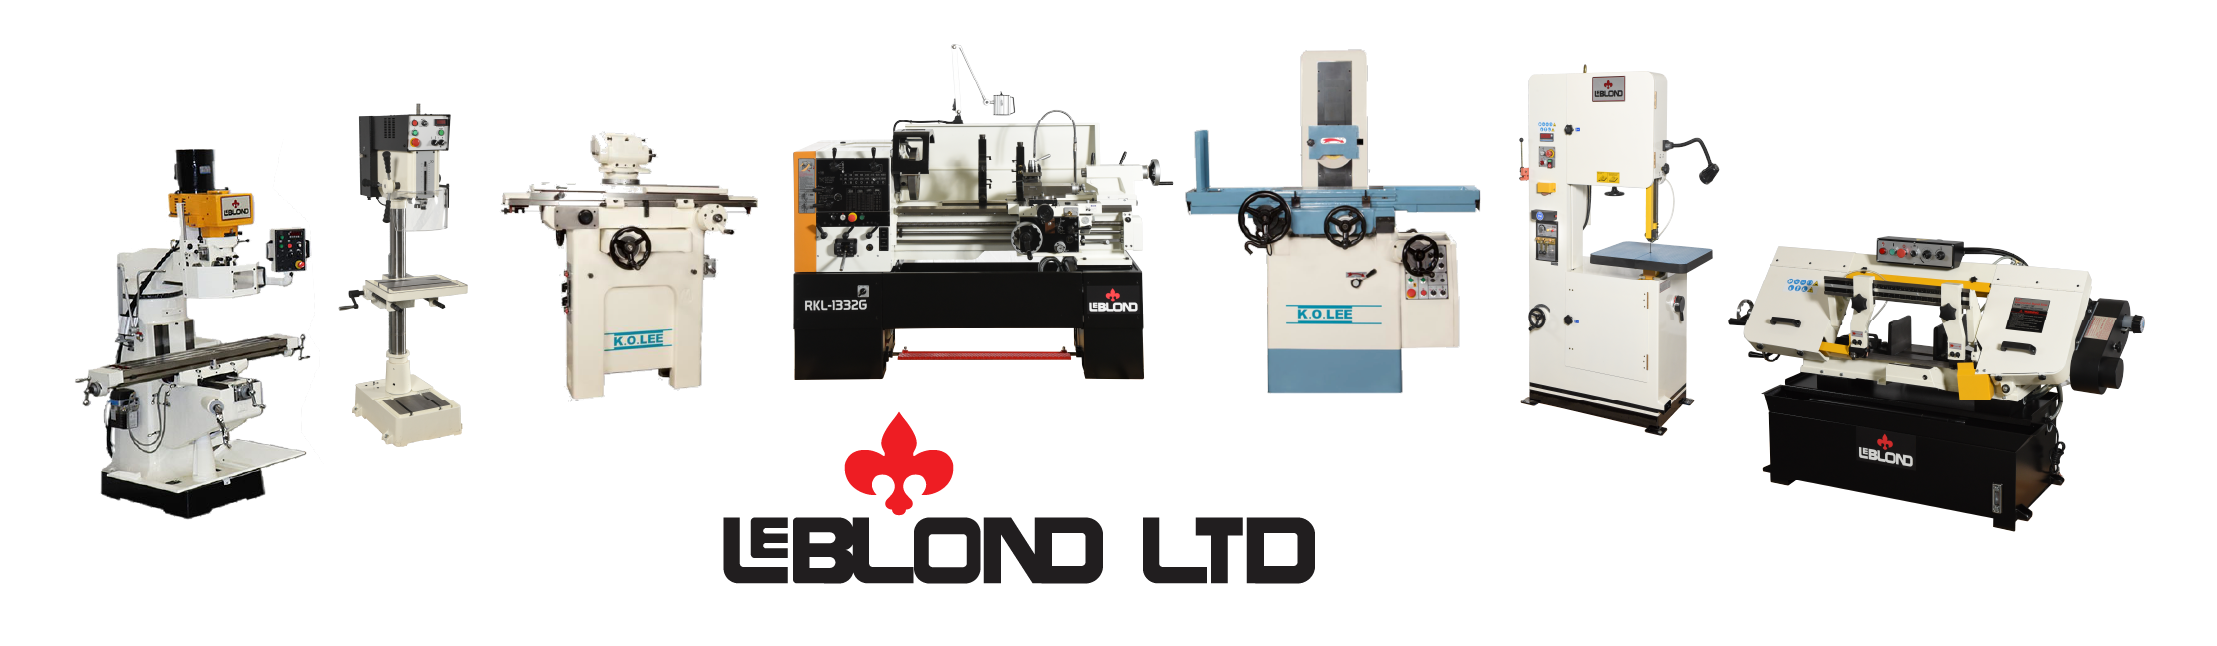 A Diverse Machine Portfolio illustrated by these seven pictured machines from Leblond Ltd.